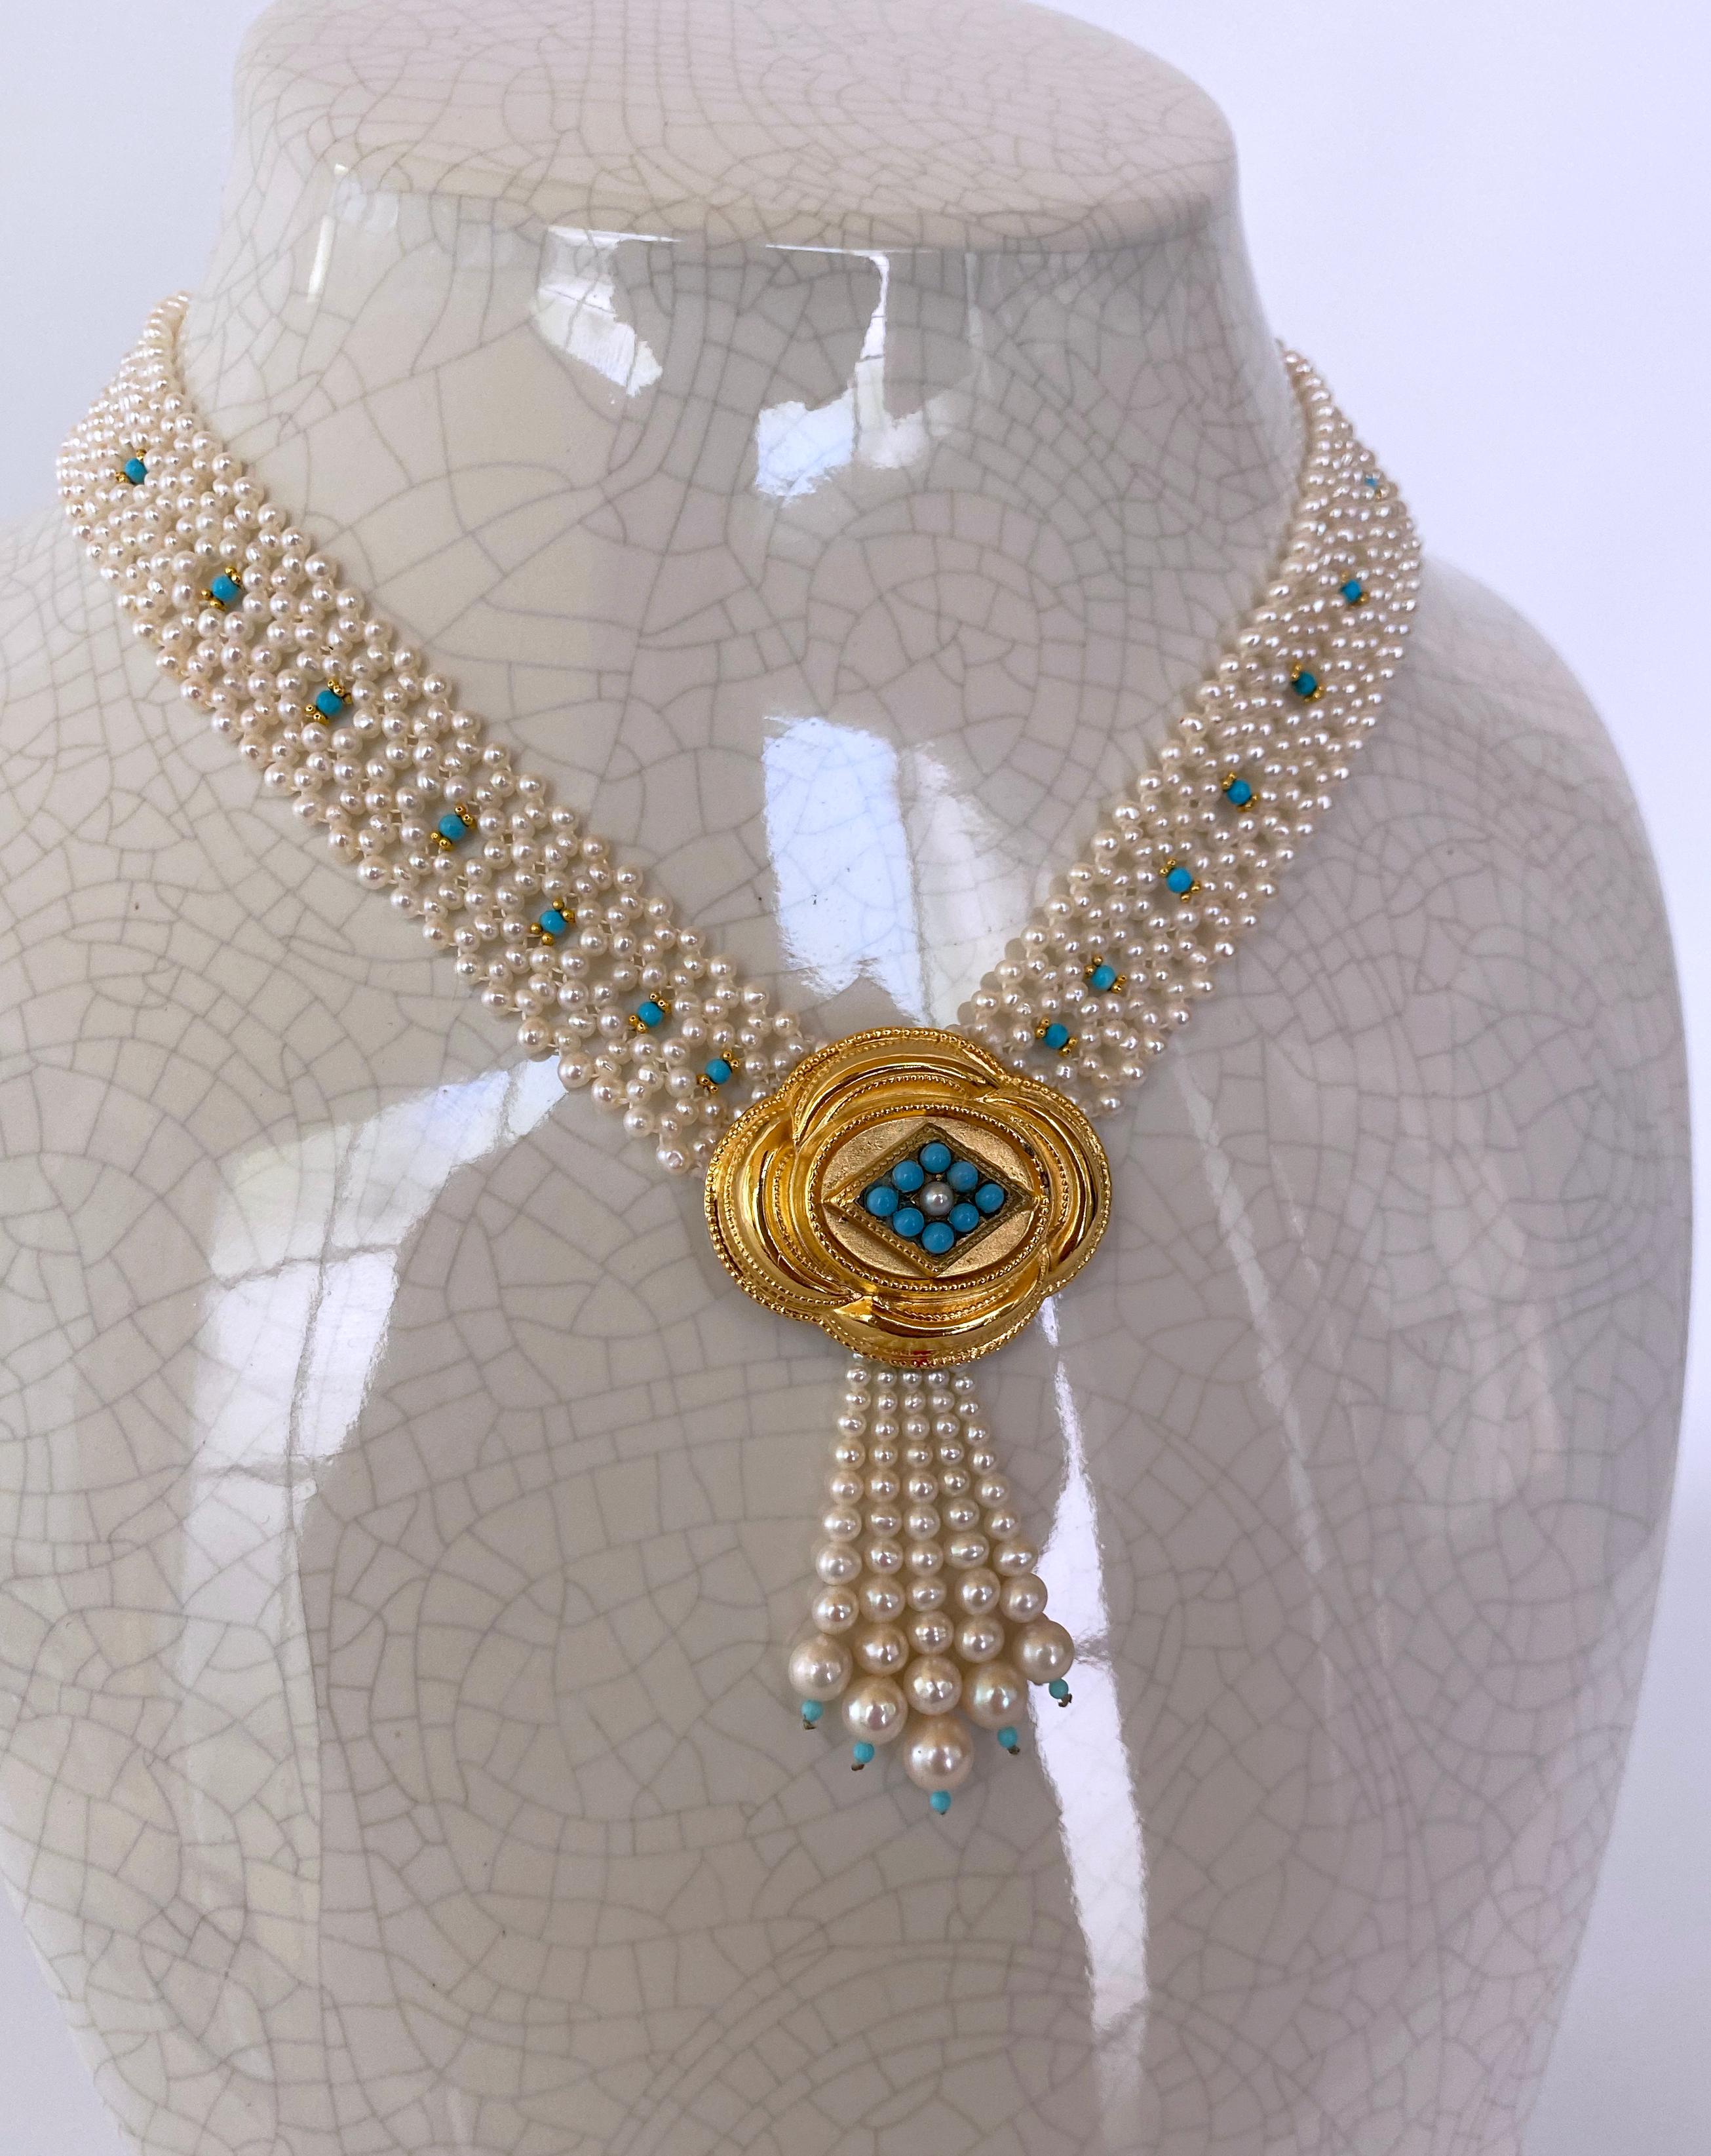 Marina J Woven Pearl and Turquoise Necklace with Vintage Centerpiece For Sale 3